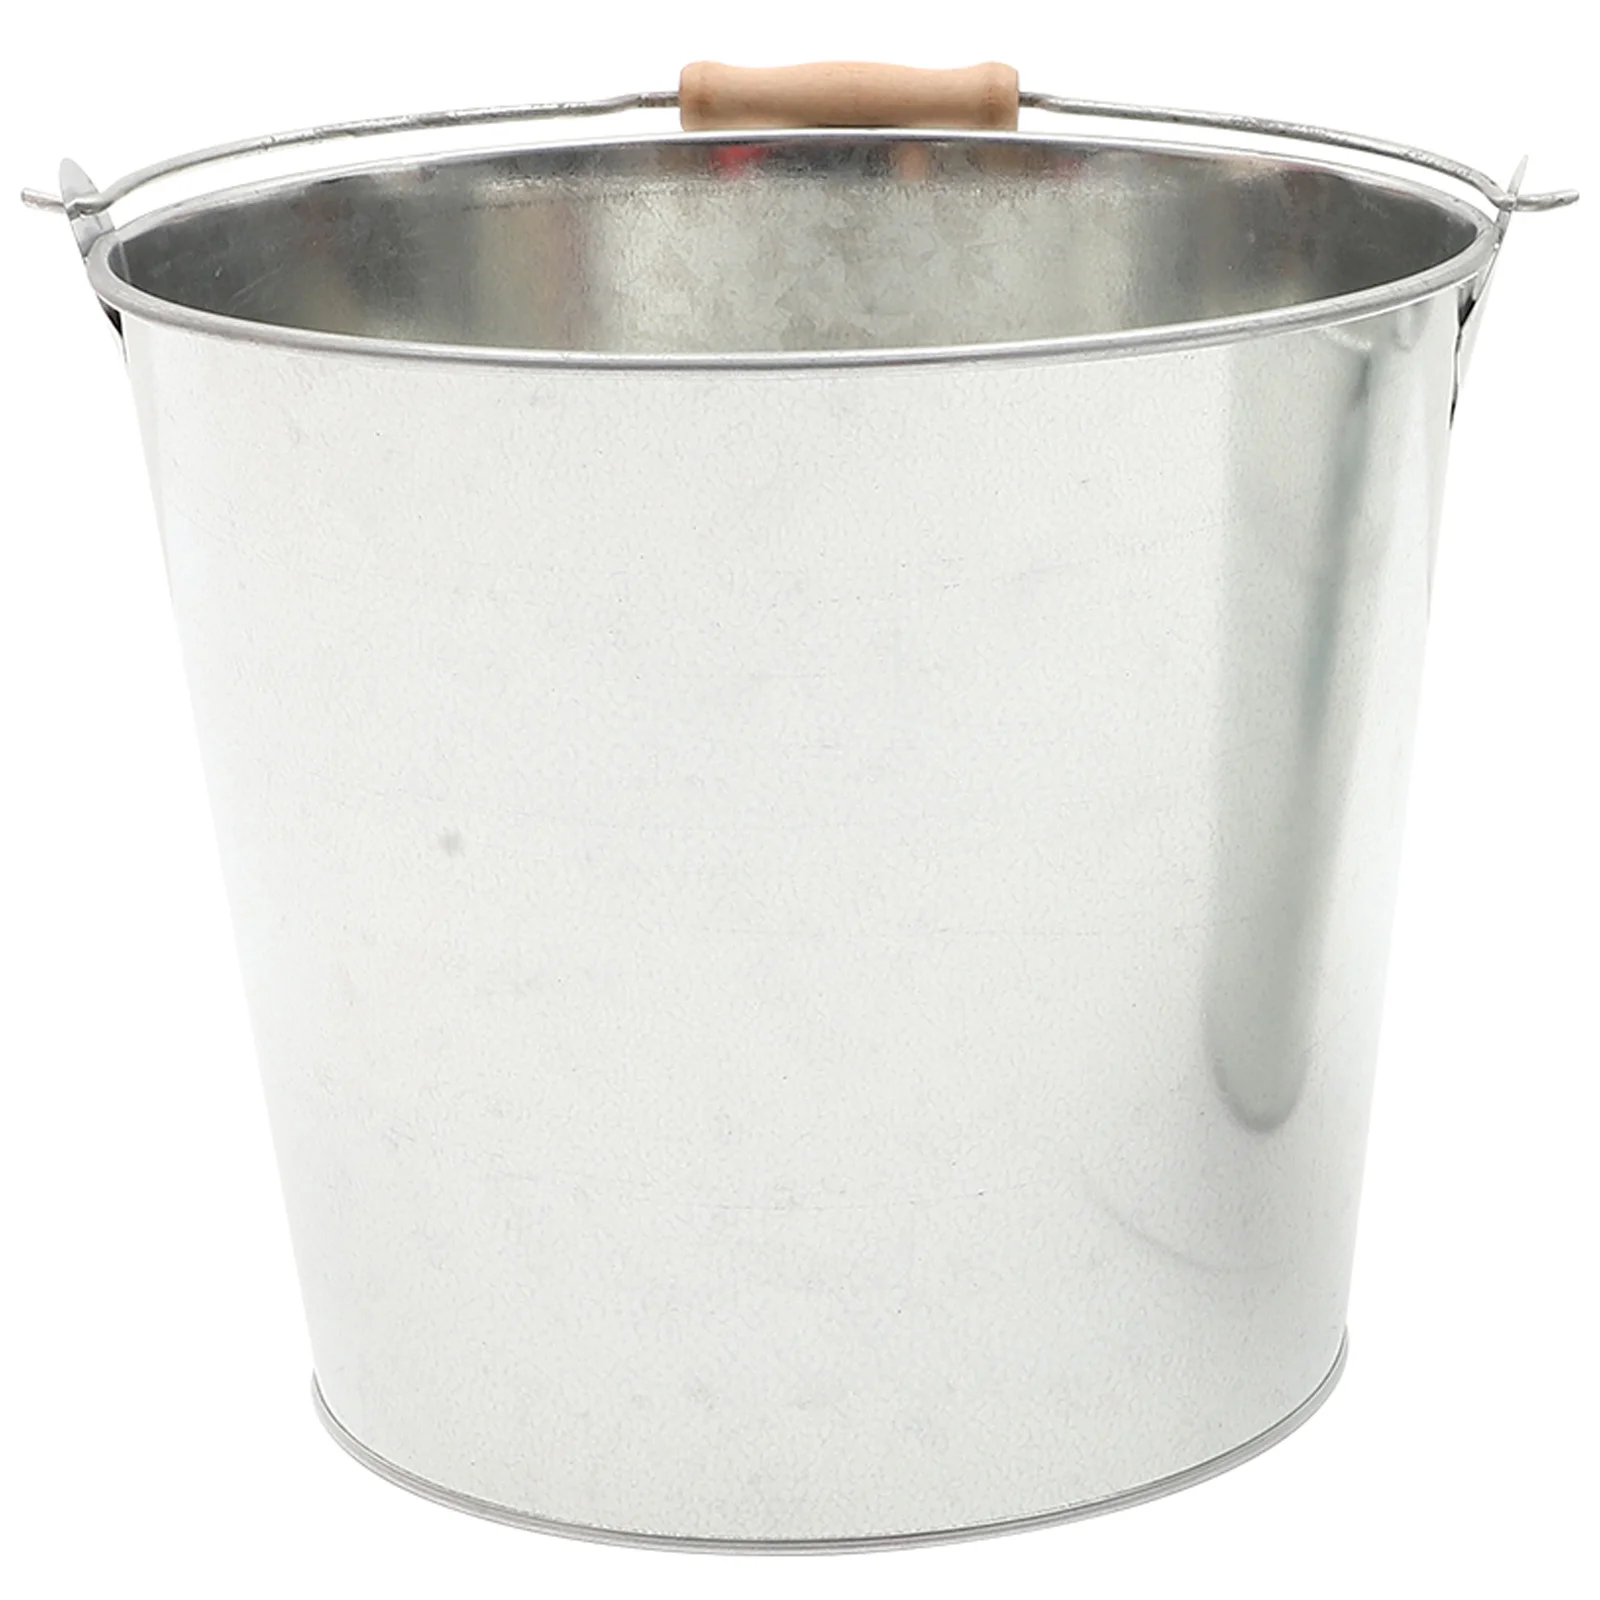 

Bucket Ash Fireplace Storage Metal Pail Can Oil Burning Coal Holder Container Incinerator Wood Stove Bin Charcoal Indoor Grease